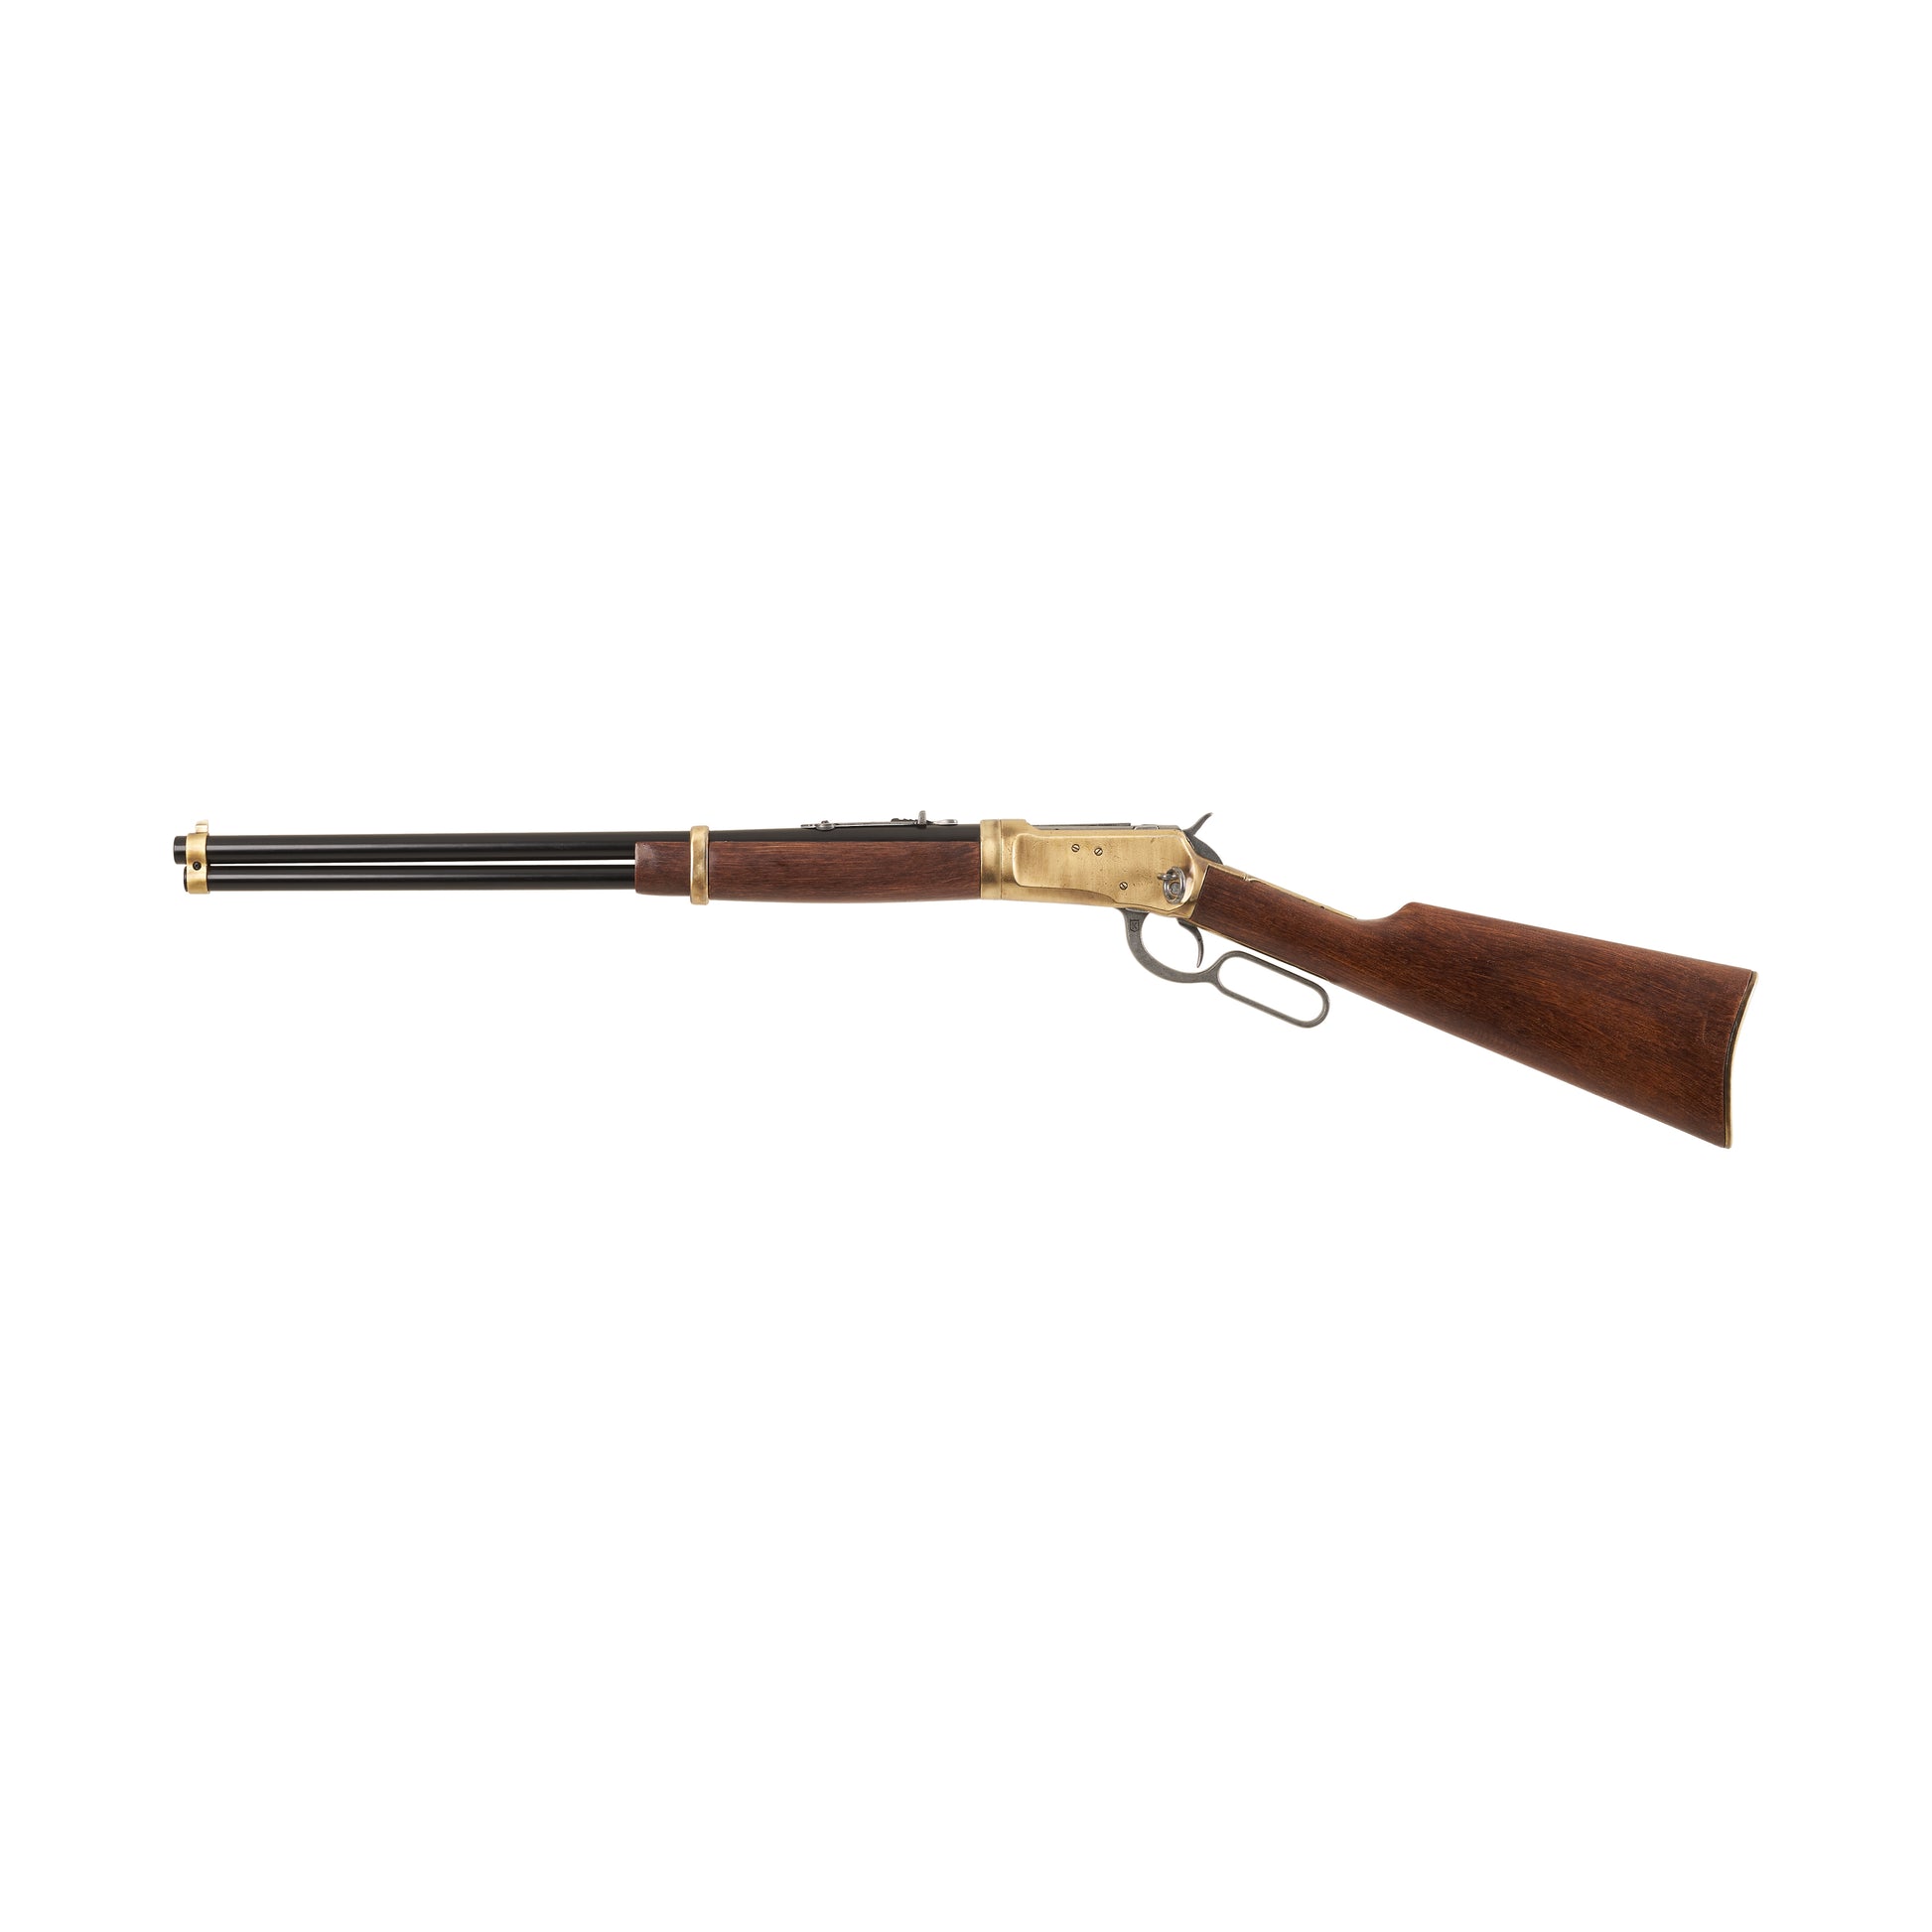 Left view of 1892 Old West Rifle with wooden stock, brass fittings and a black barrel